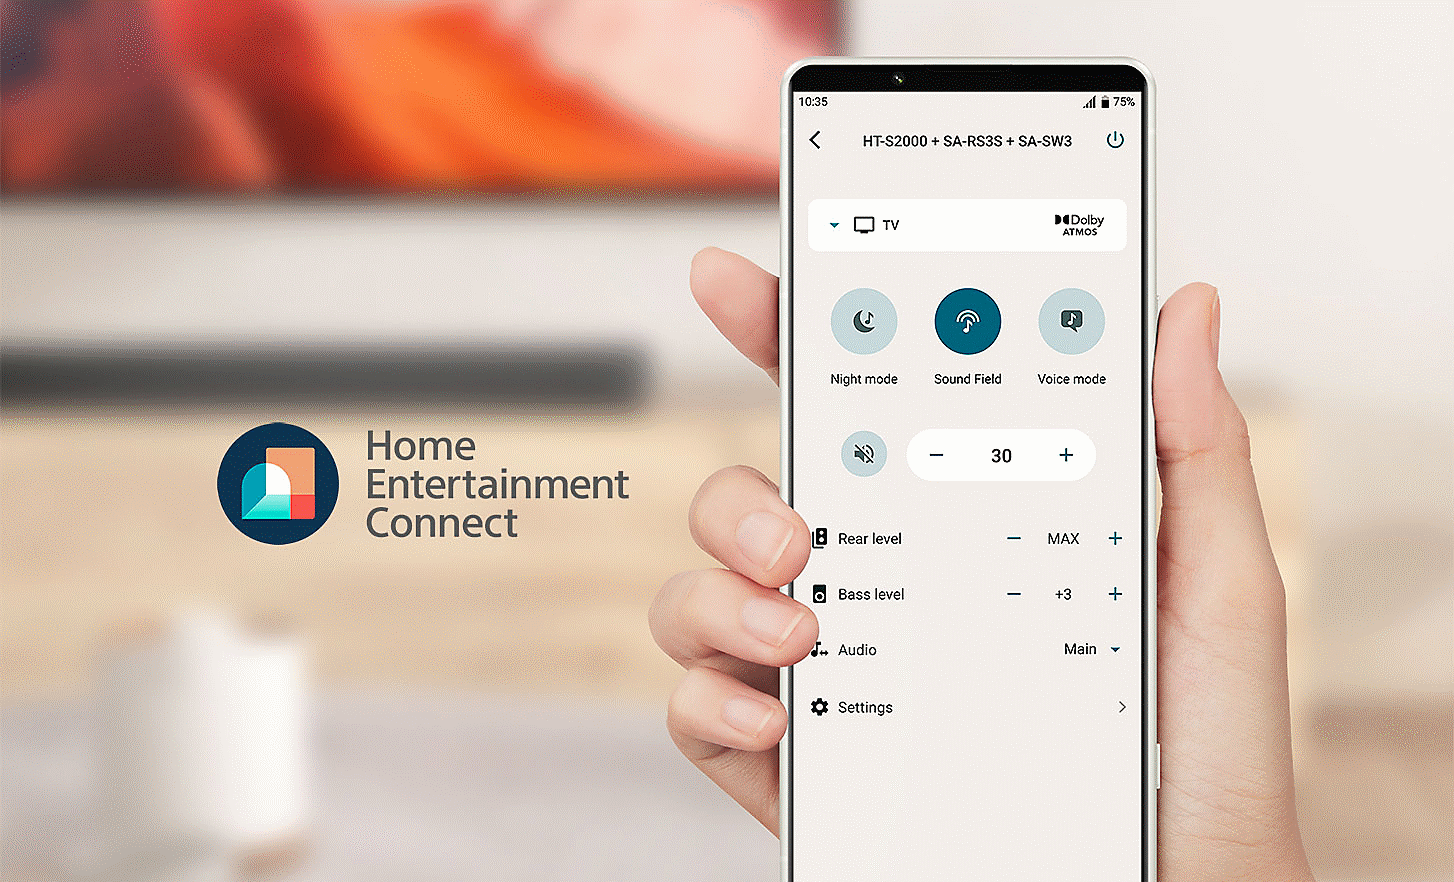 Image of a hand holding a mobile phone displaying a settings menu, a Home Entertainment Connect logo sits on the left